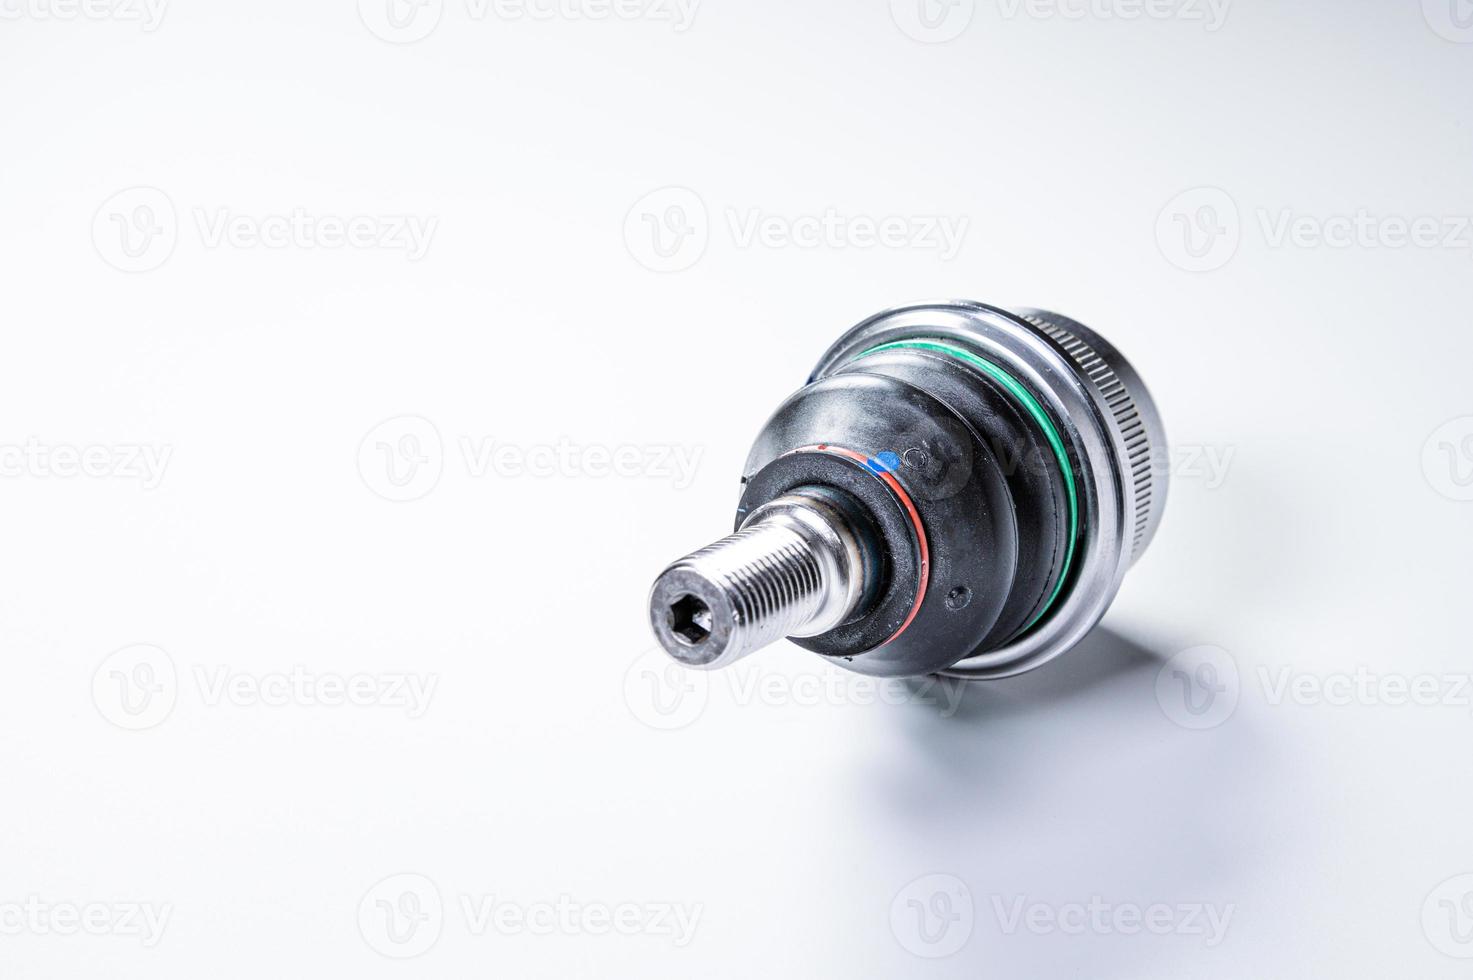 New spare parts spherical ball joints of a suspension bracket of a car on a gray background photo